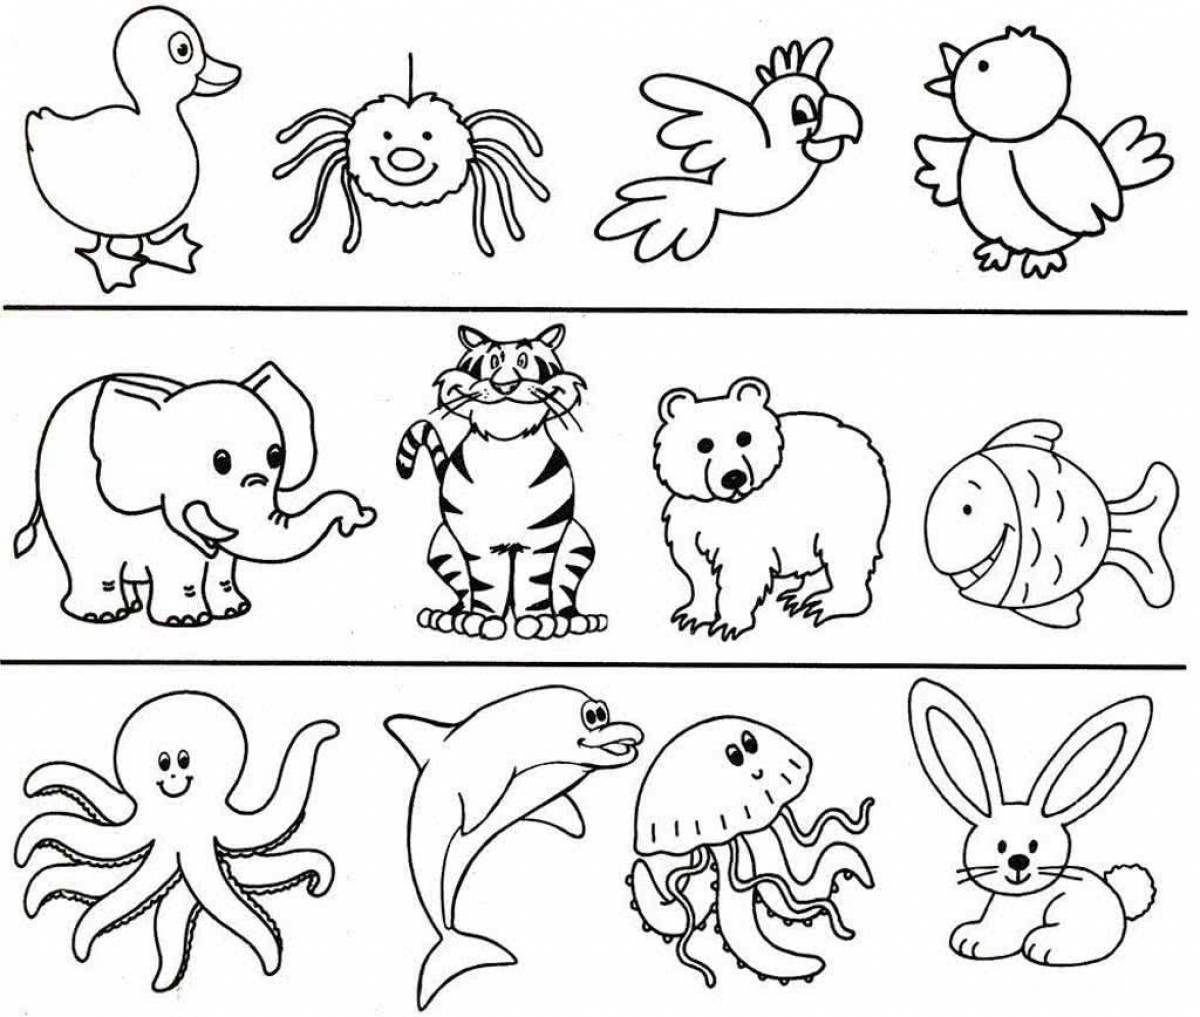 Frantic animal coloring book for 5-6 year olds